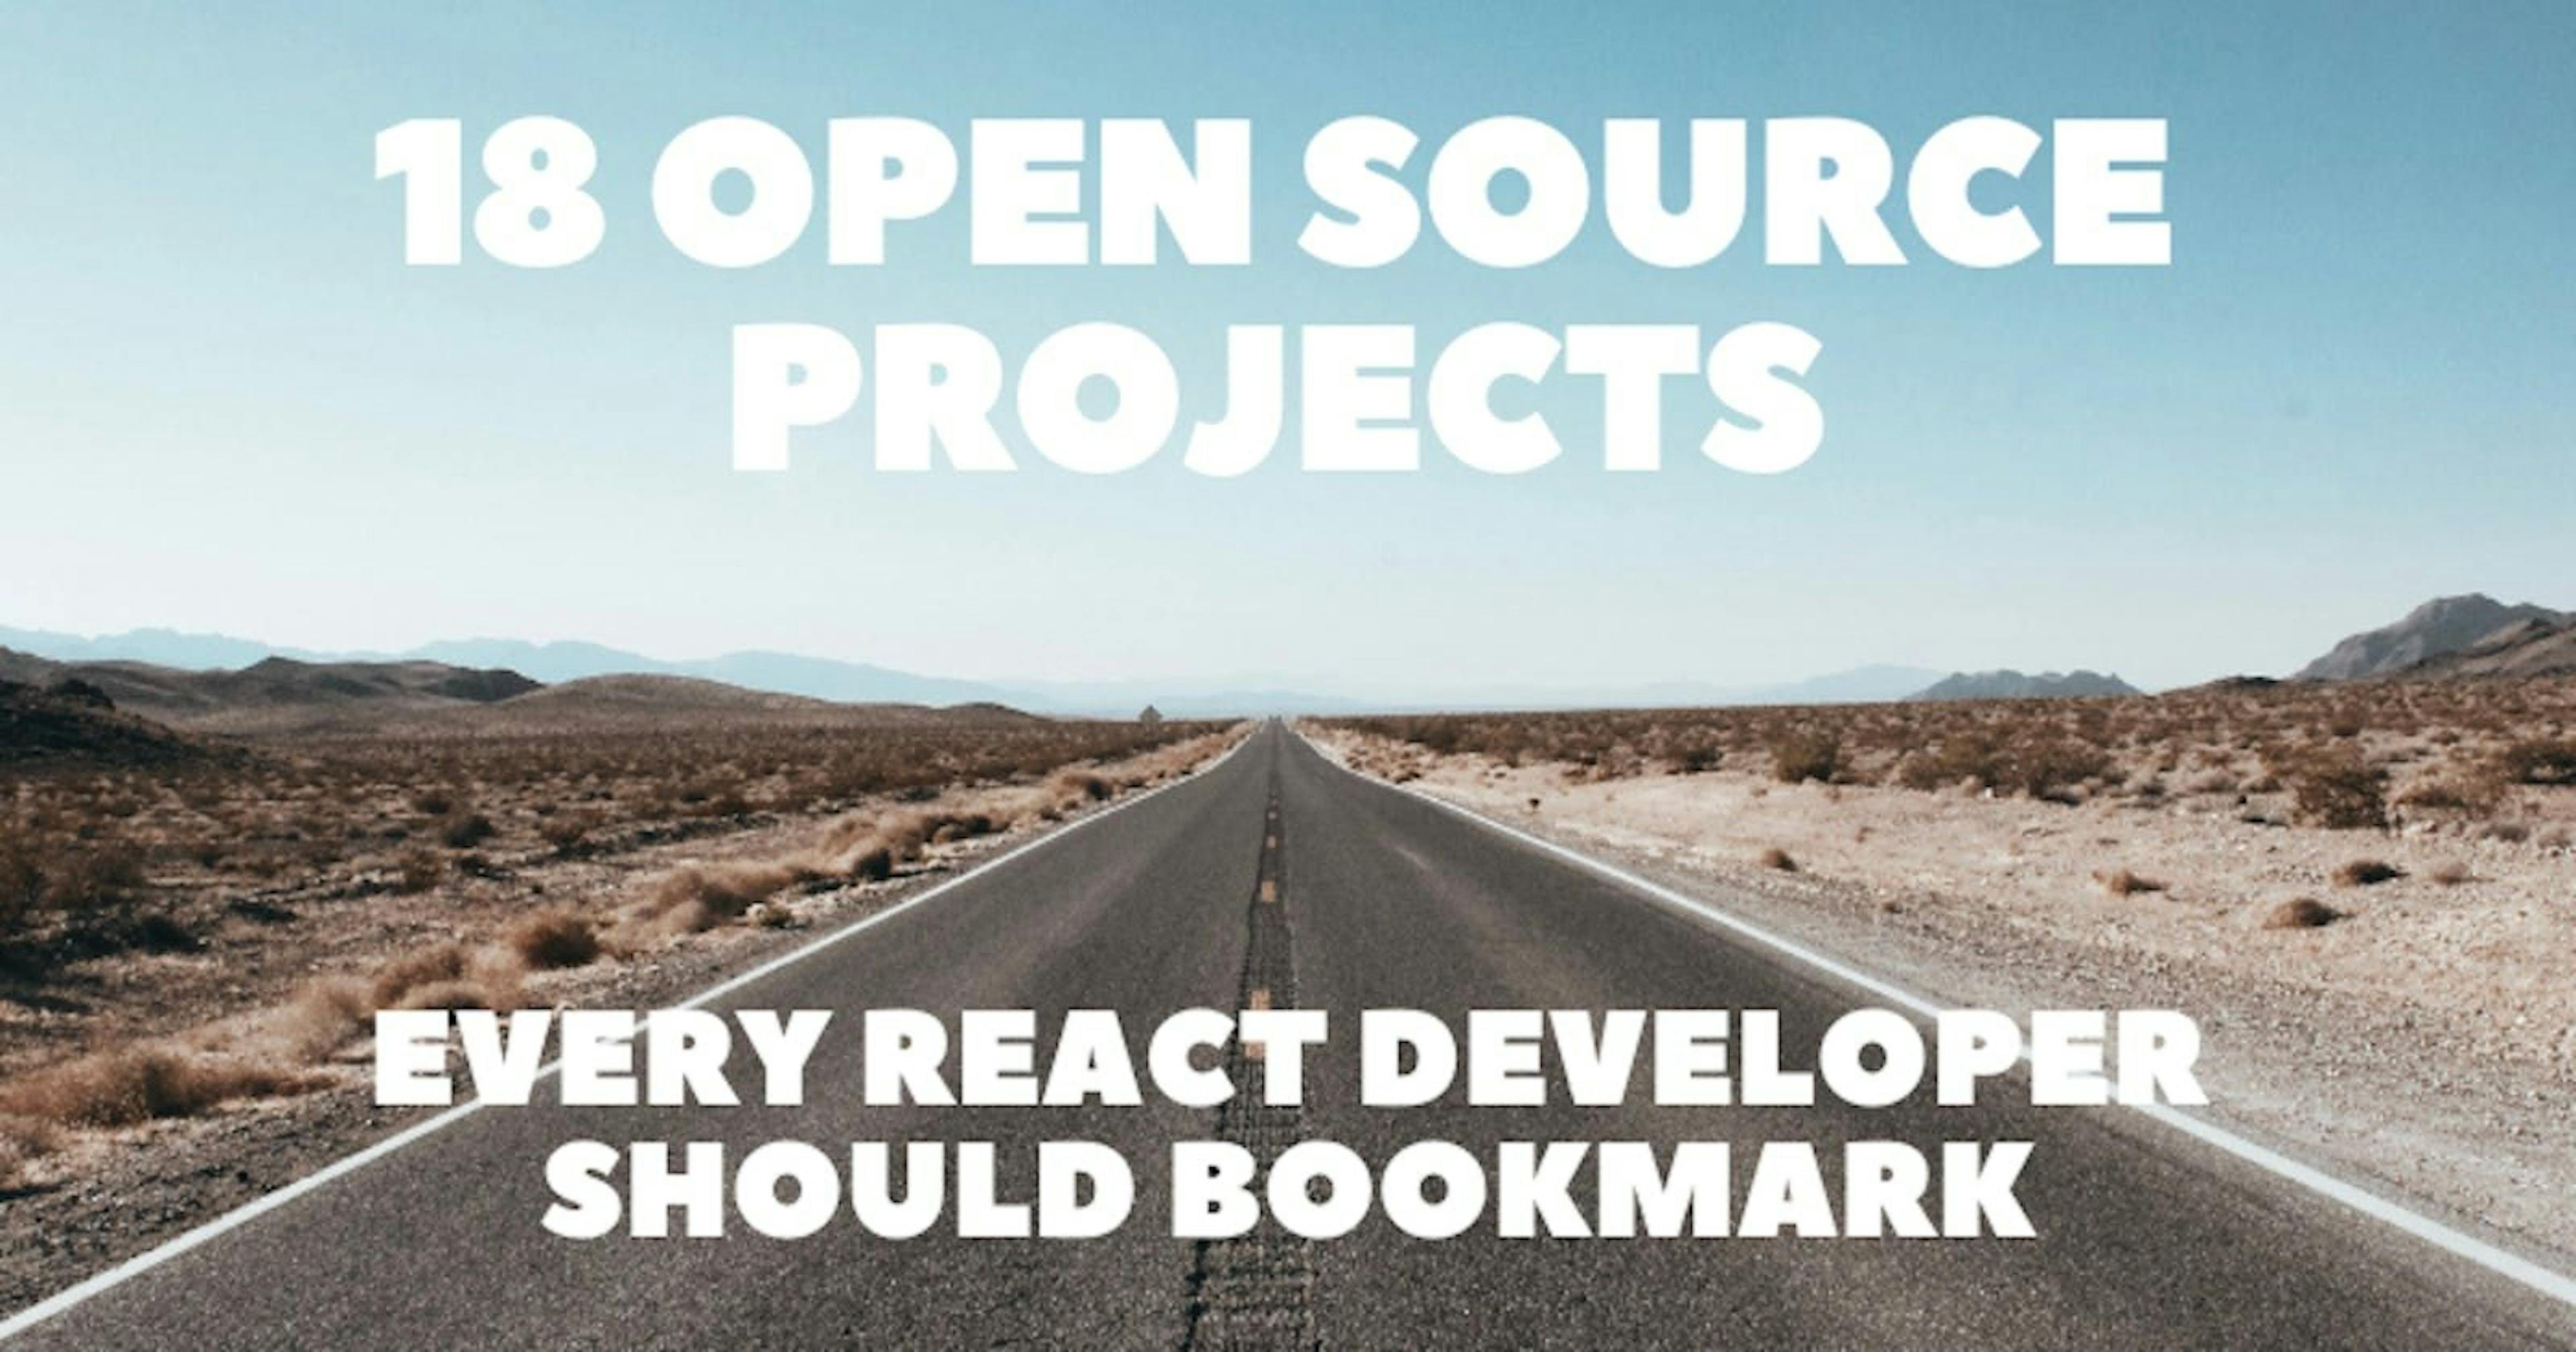 /are-you-a-react-dev-here-are-18-open-source-projects-you-should-bookmark feature image